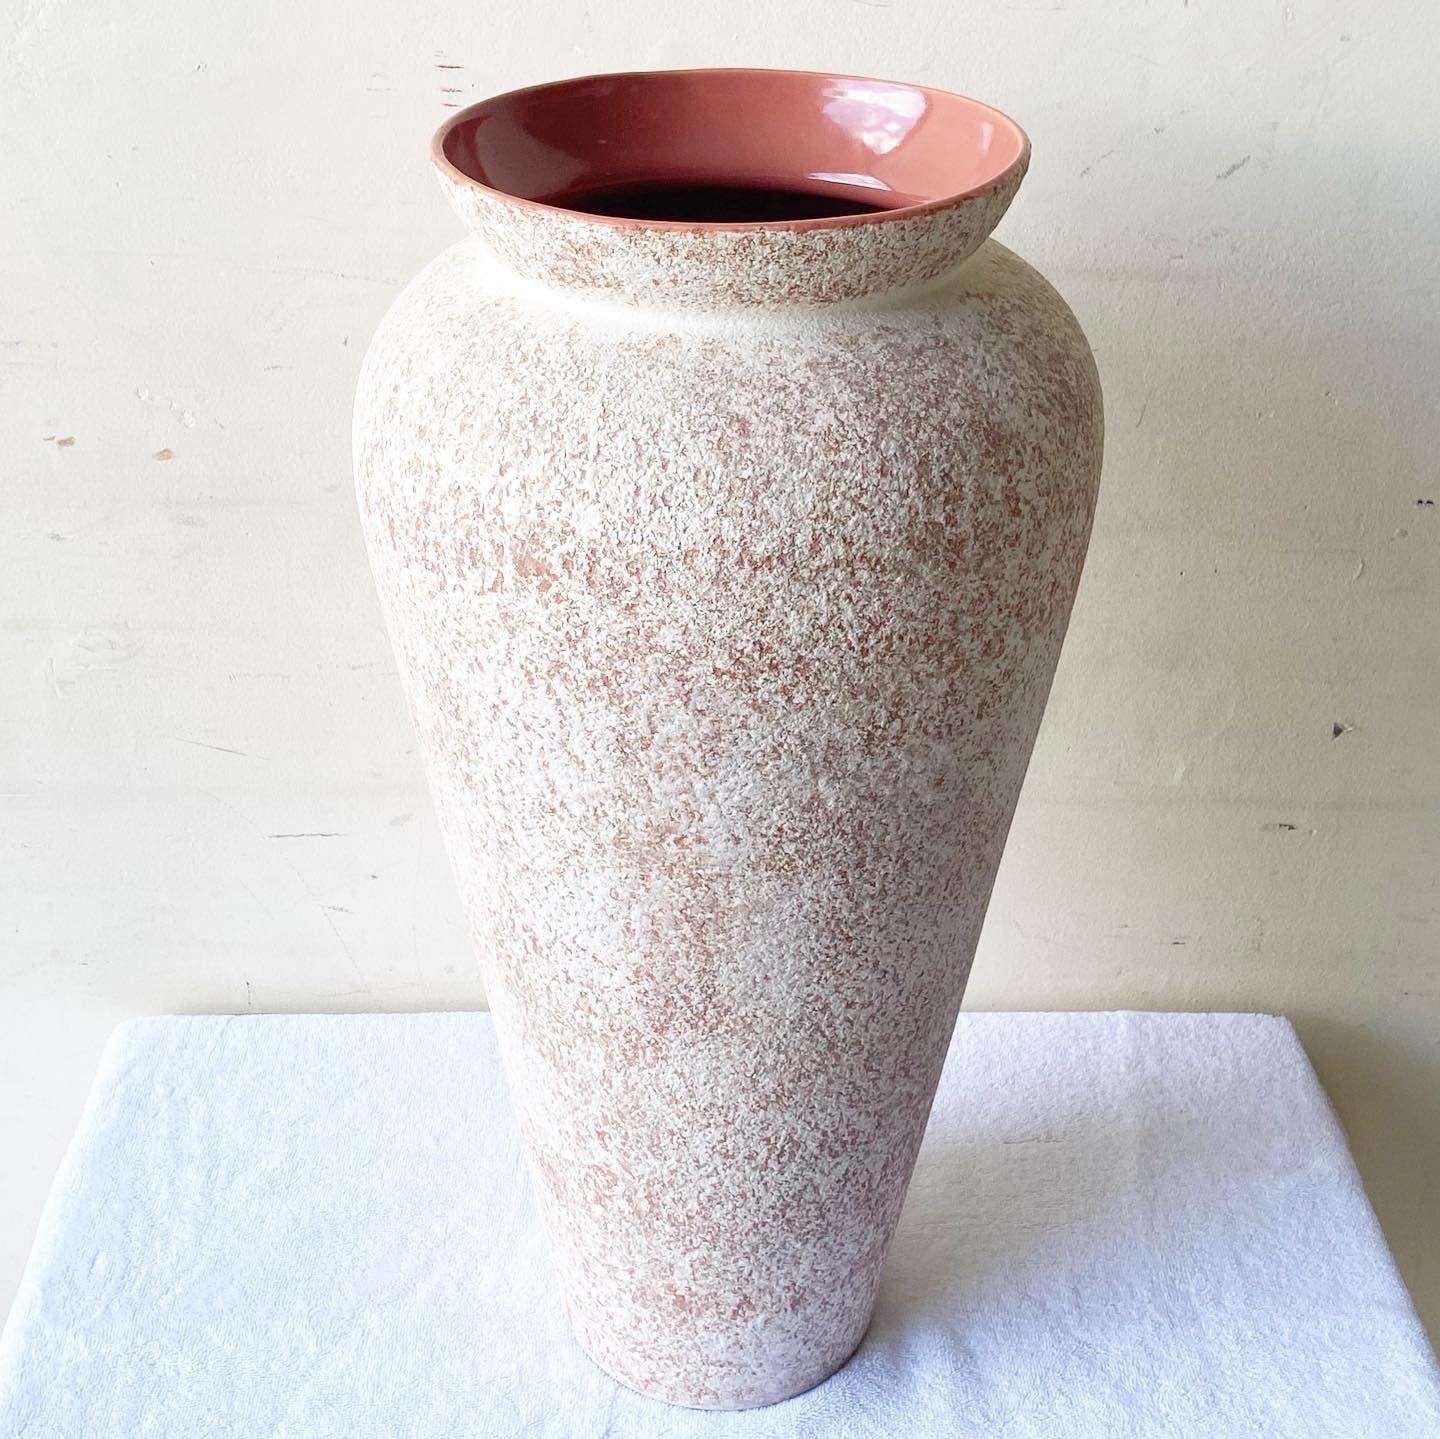 Exceptional vintage postmodern ceramic floor vase by Haeger. Features a link gloss finished with a rough white speckled finish.
